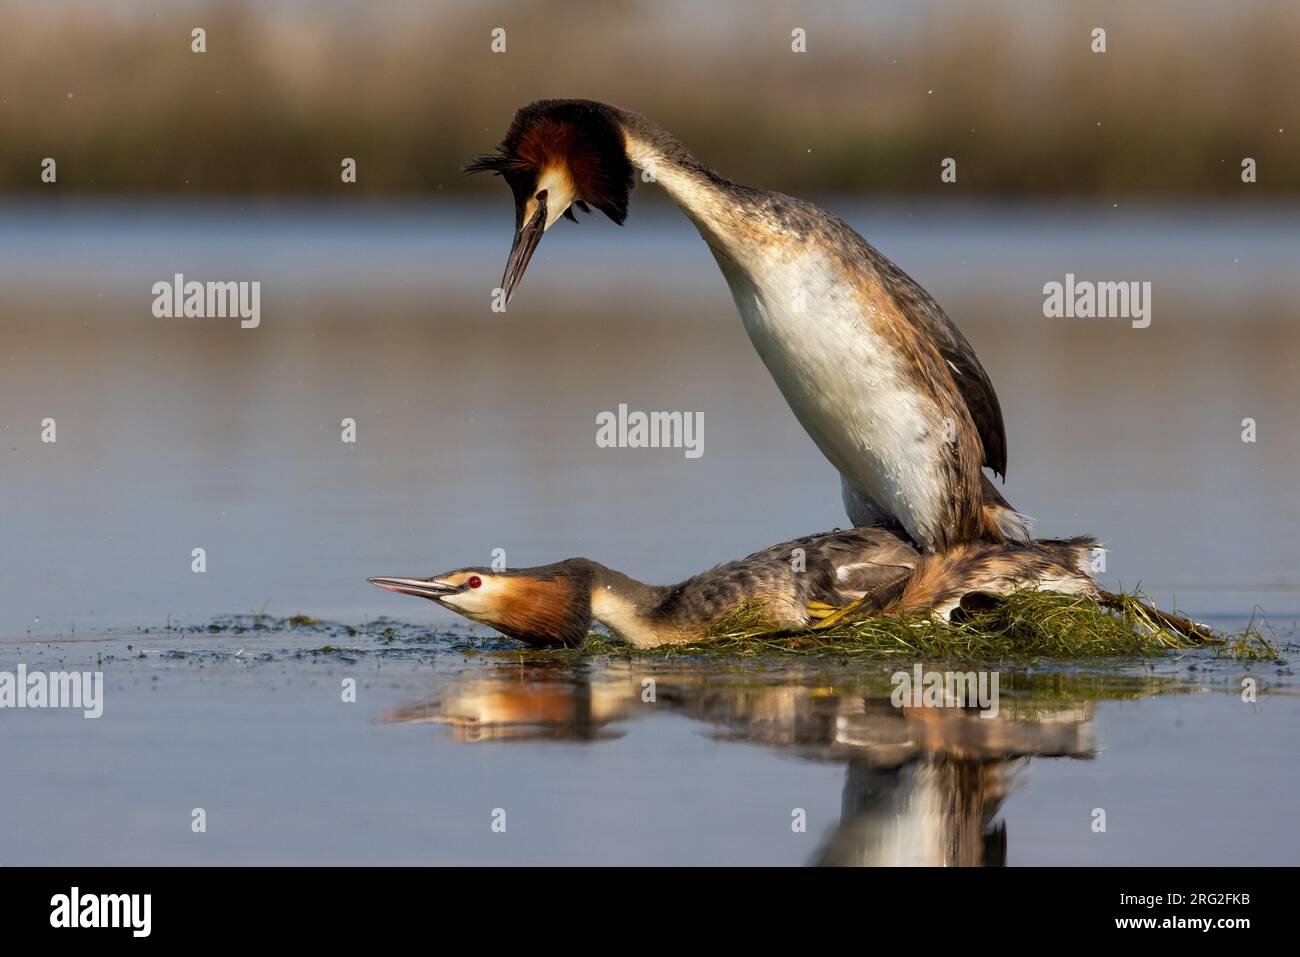 Great Crested Grebe, Podiceps cristatus, in Italy. Mating behavior from a pair of grebes on its nest. Stock Photo